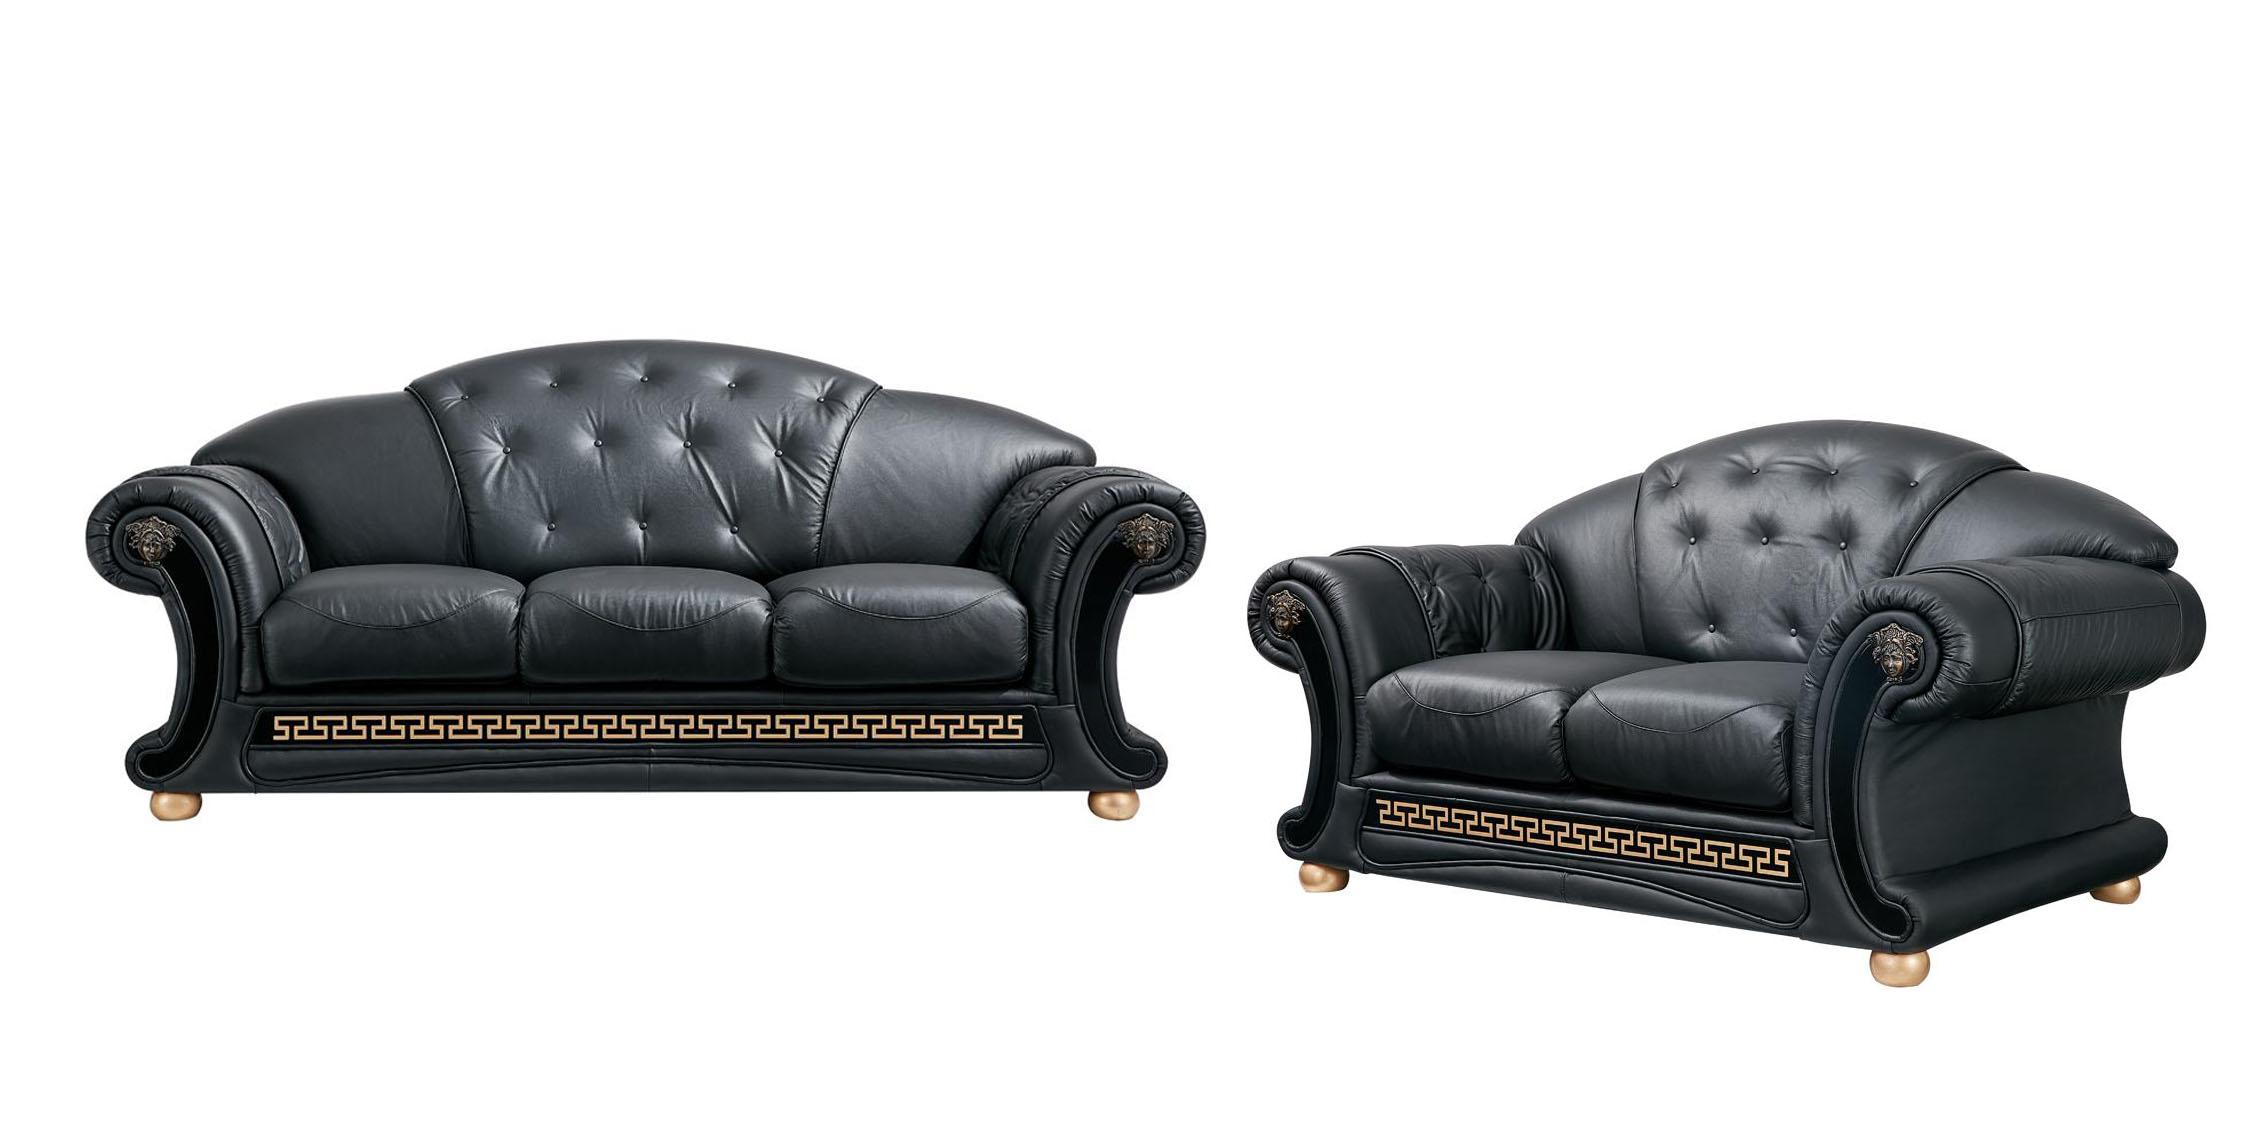 Traditional Sofa and Loveseat Set Apolo ESF-Apolo Black-2PC in Black Top grain leather